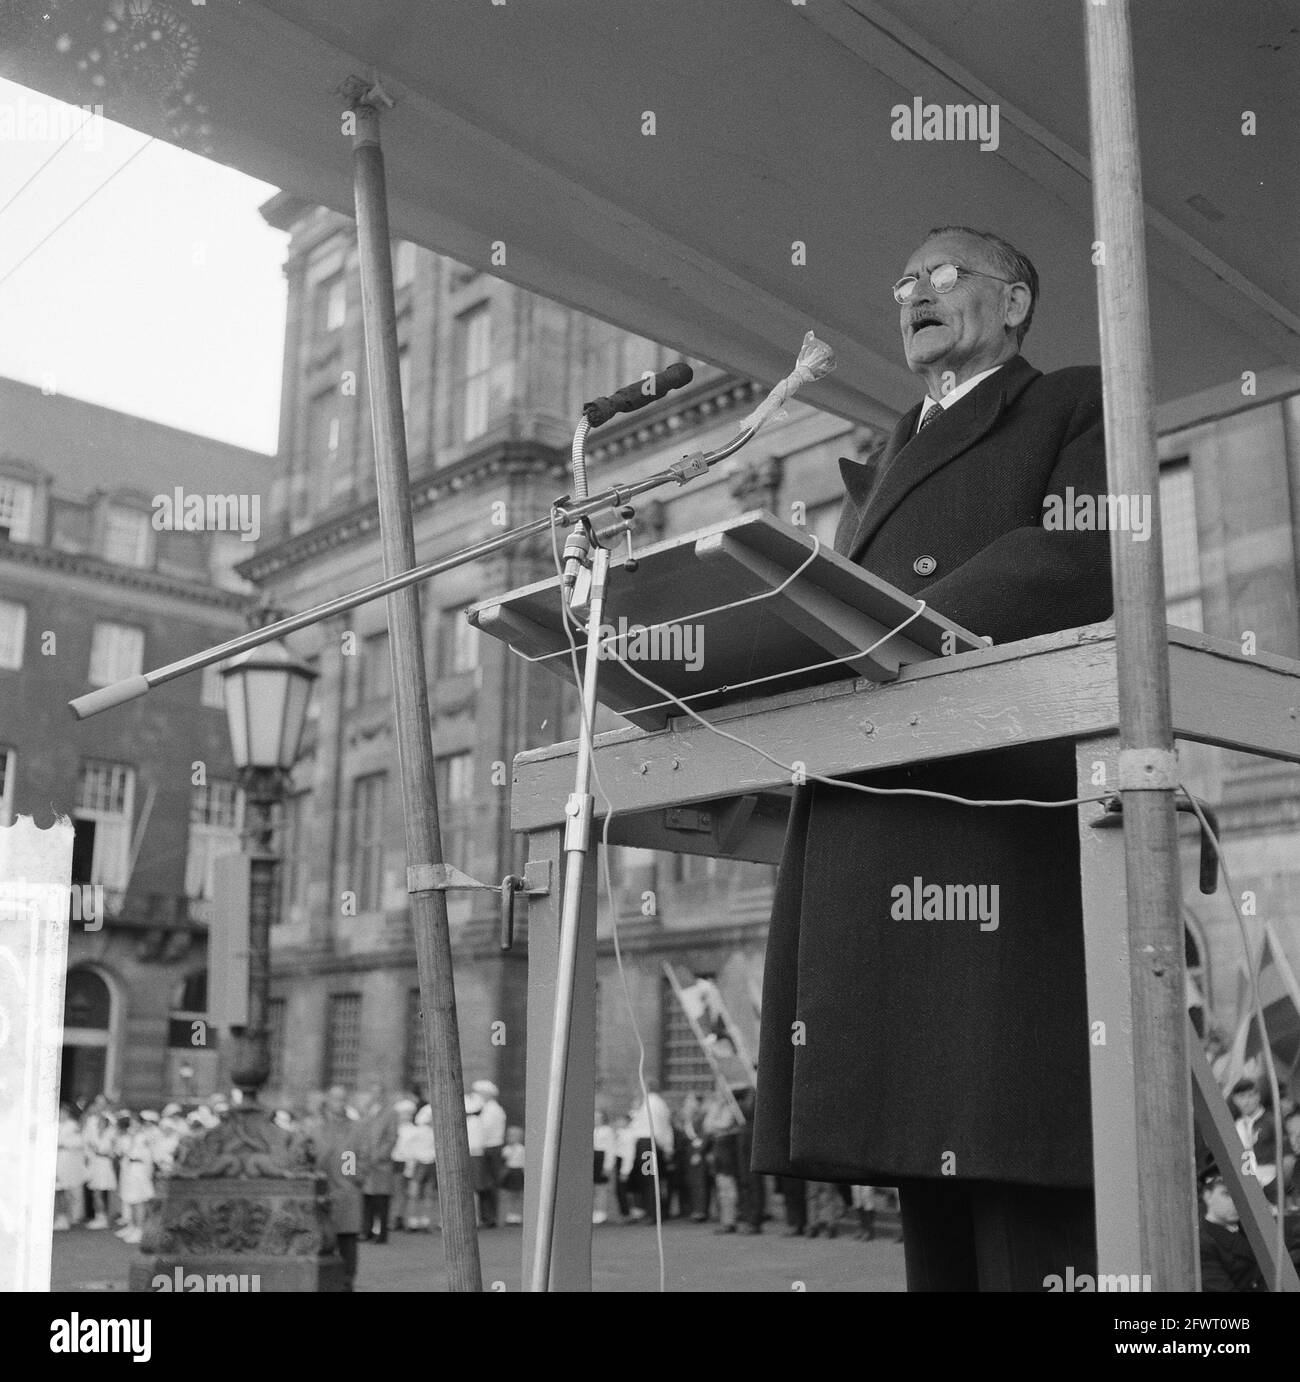 United Nations Day in Amsterdam. Dr. Willem Drees during speech, 29 October 1961, speeches, The Netherlands, 20th century press agency photo, news to remember, documentary, historic photography 1945-1990, visual stories, human history of the Twentieth Century, capturing moments in time Stock Photo